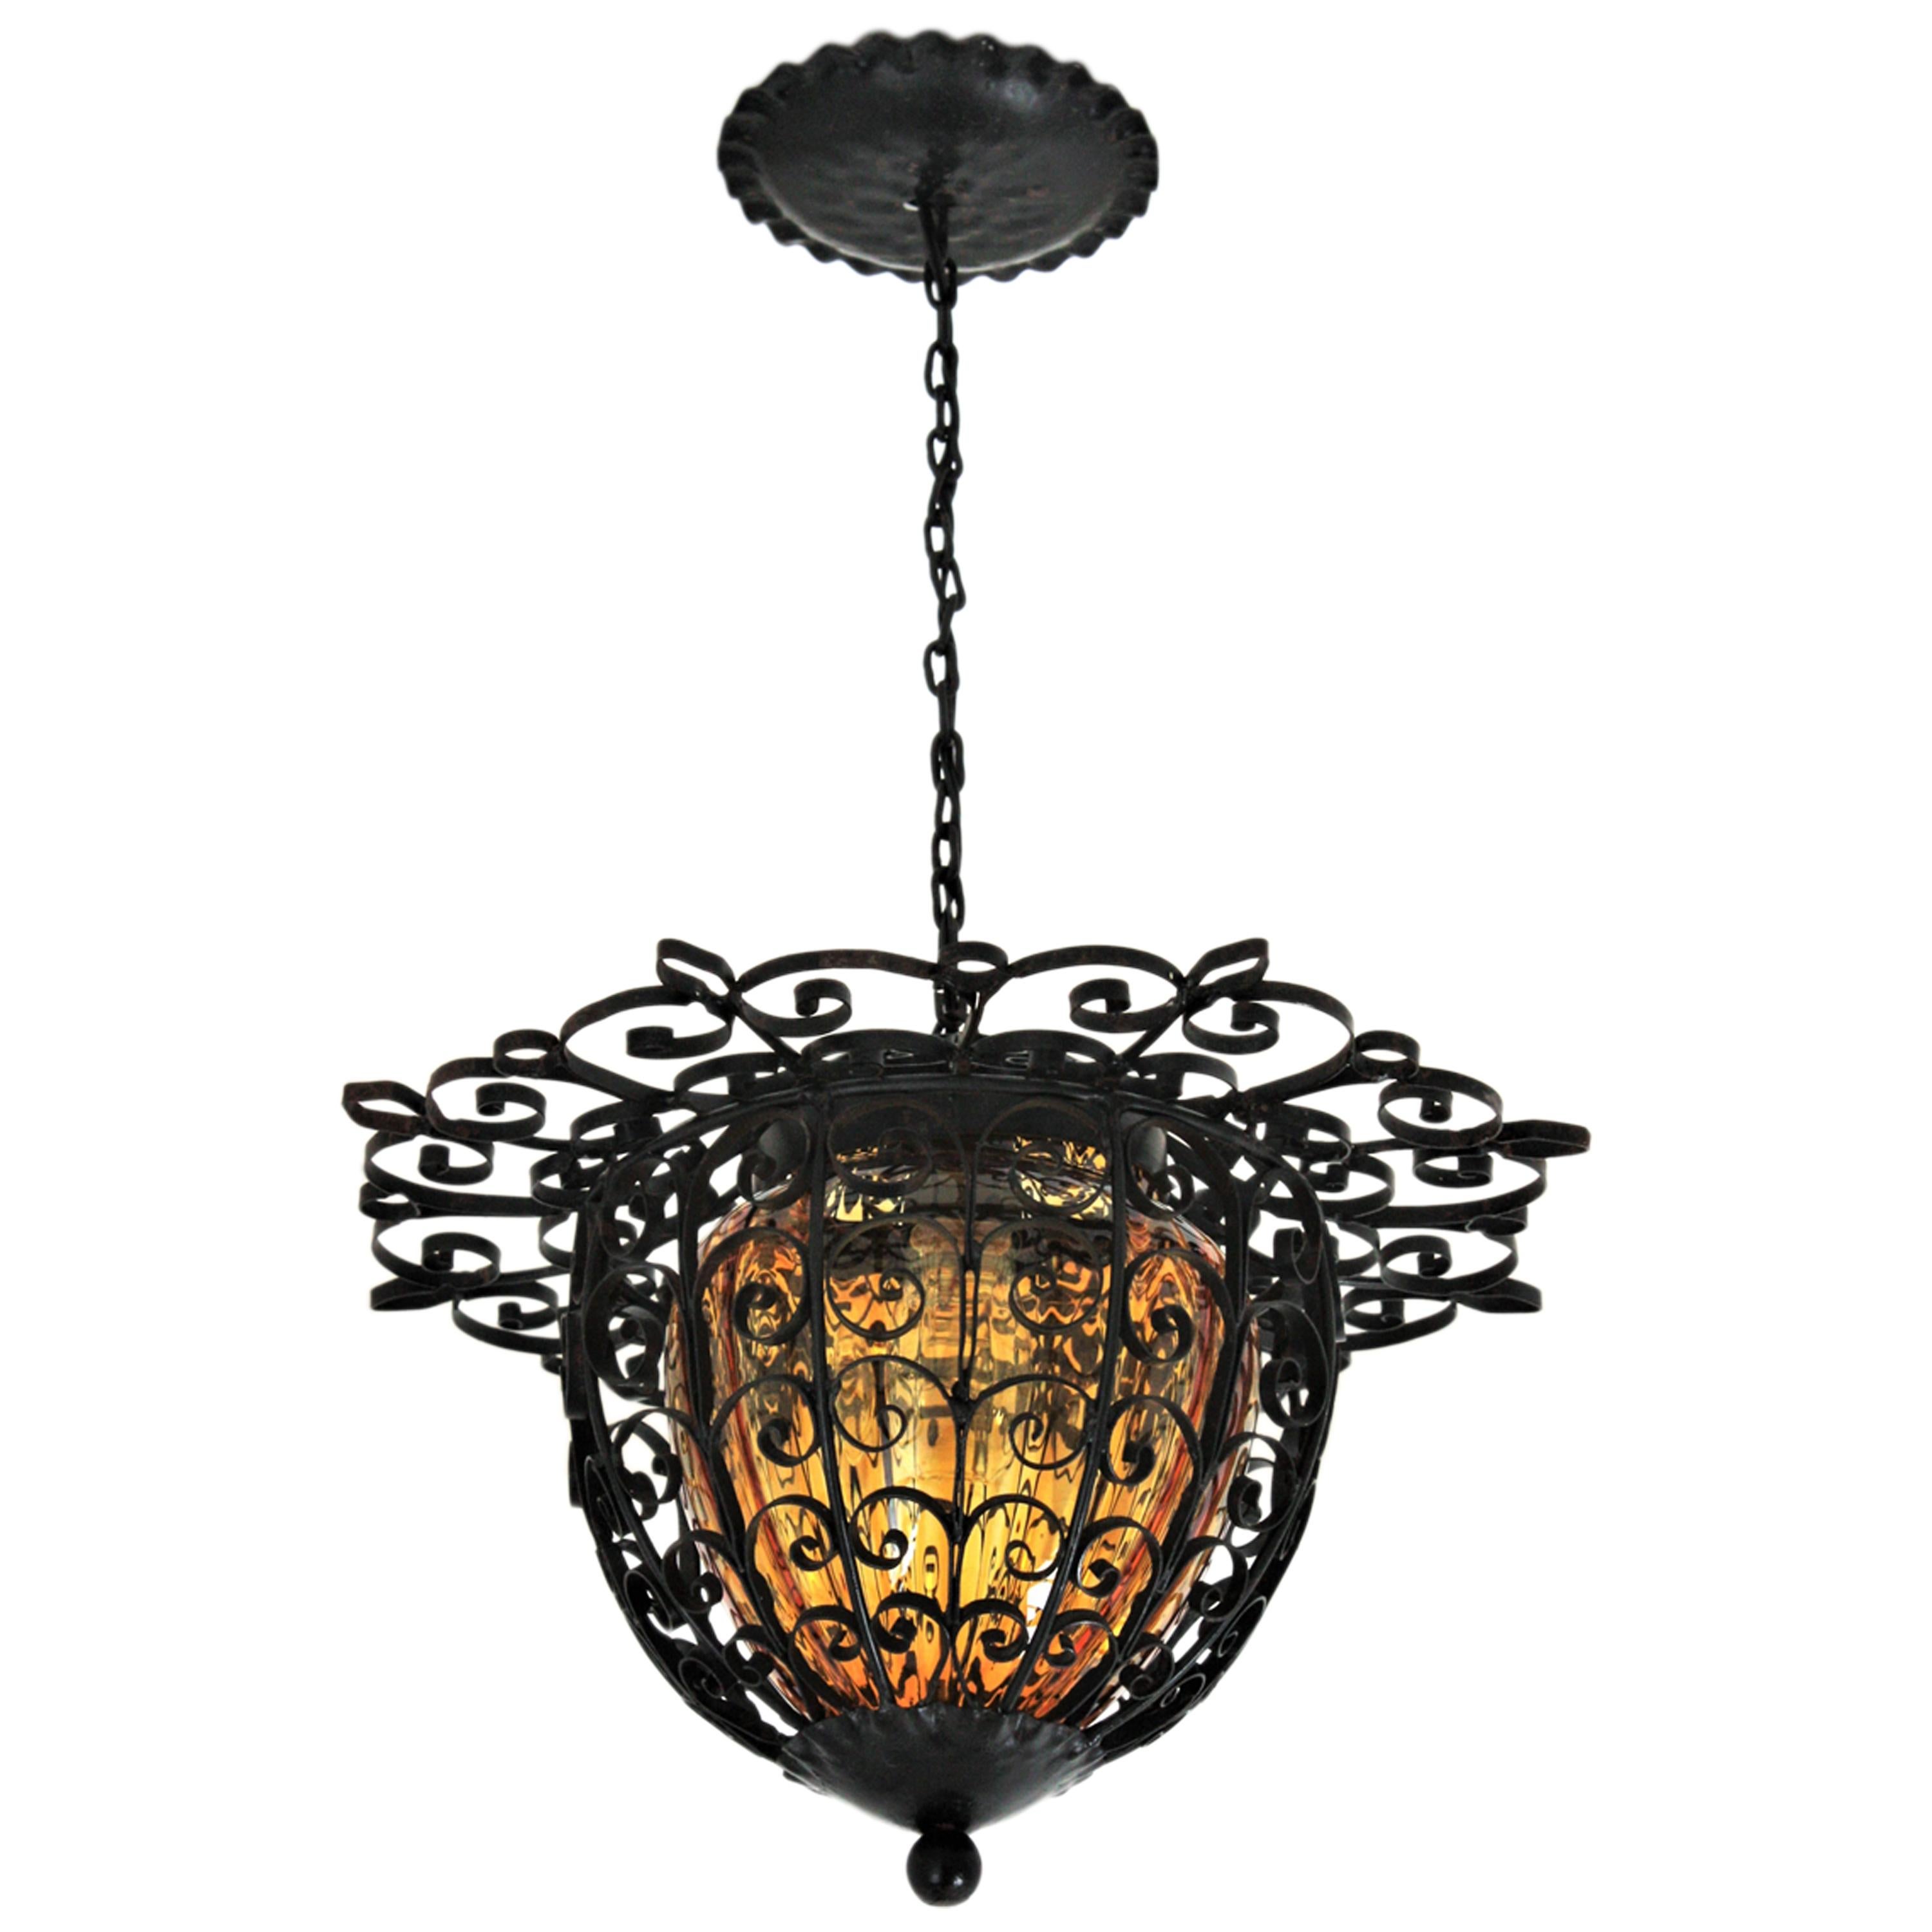 Spanish Lantern Pendant Light in Wrought Iron with Amber Blown Glass Shade